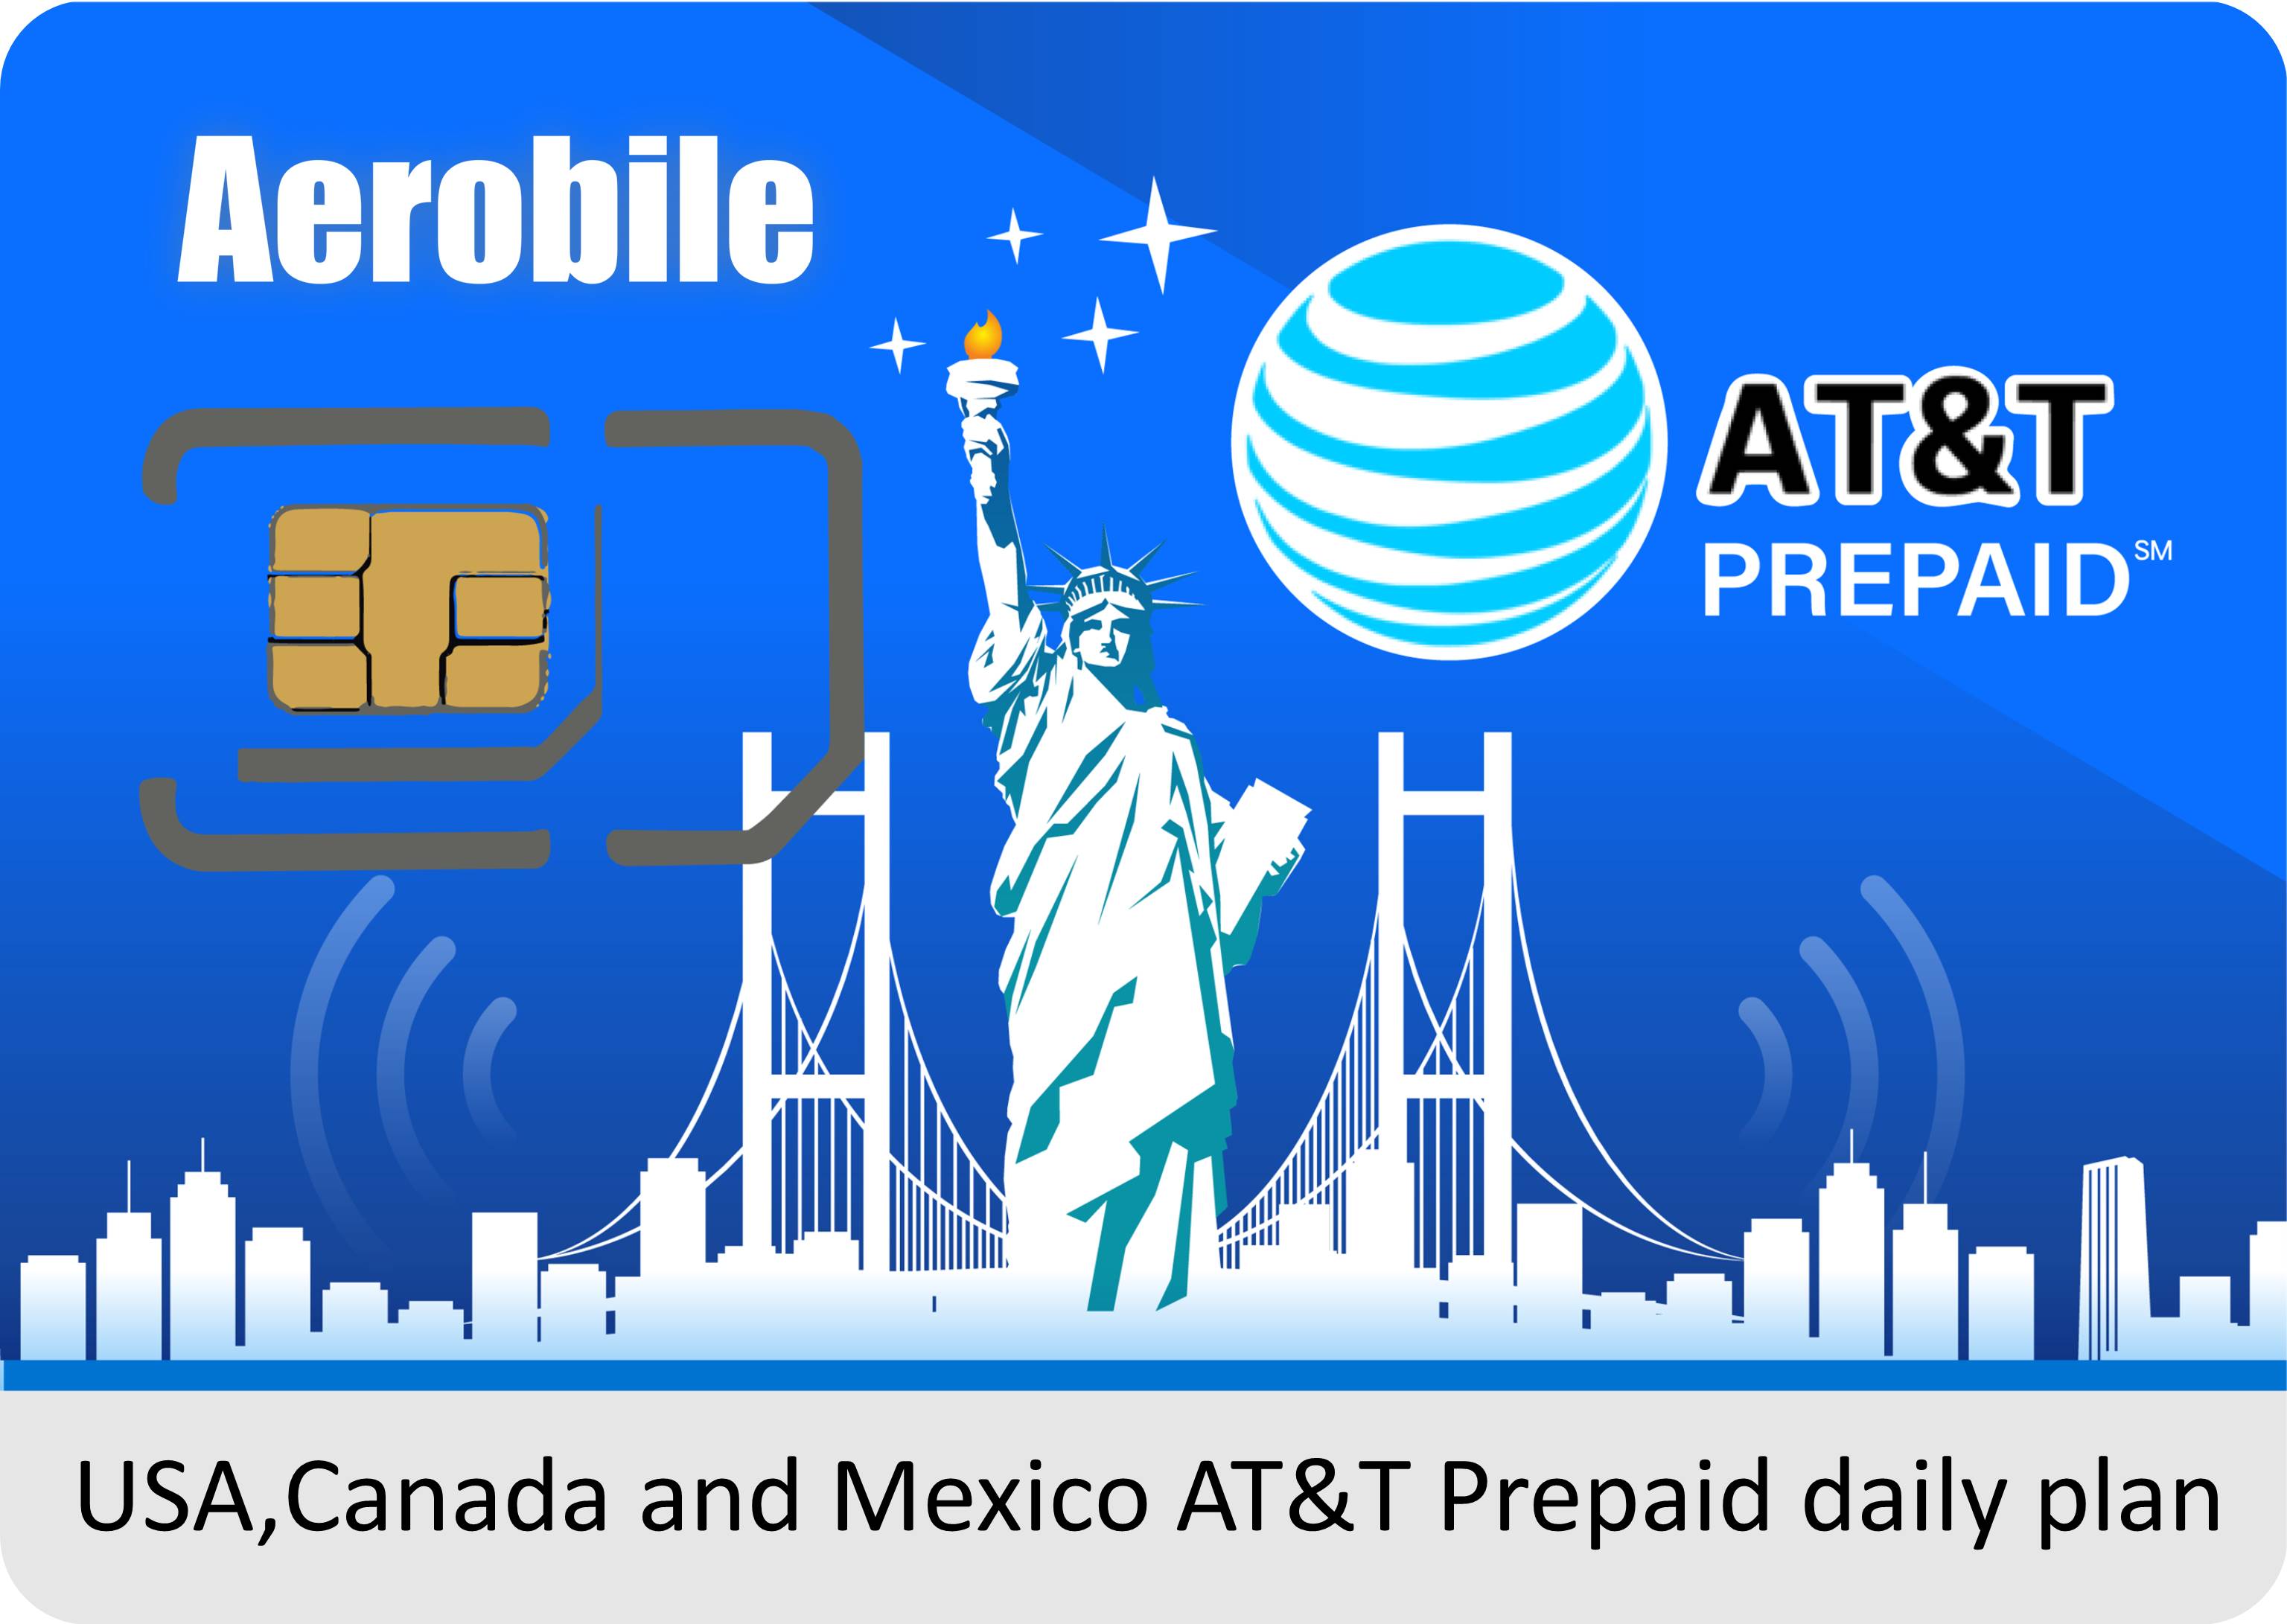 USA AT&T Prepaid SIM card 58 day plan - Unlimited calls/SMS and data!